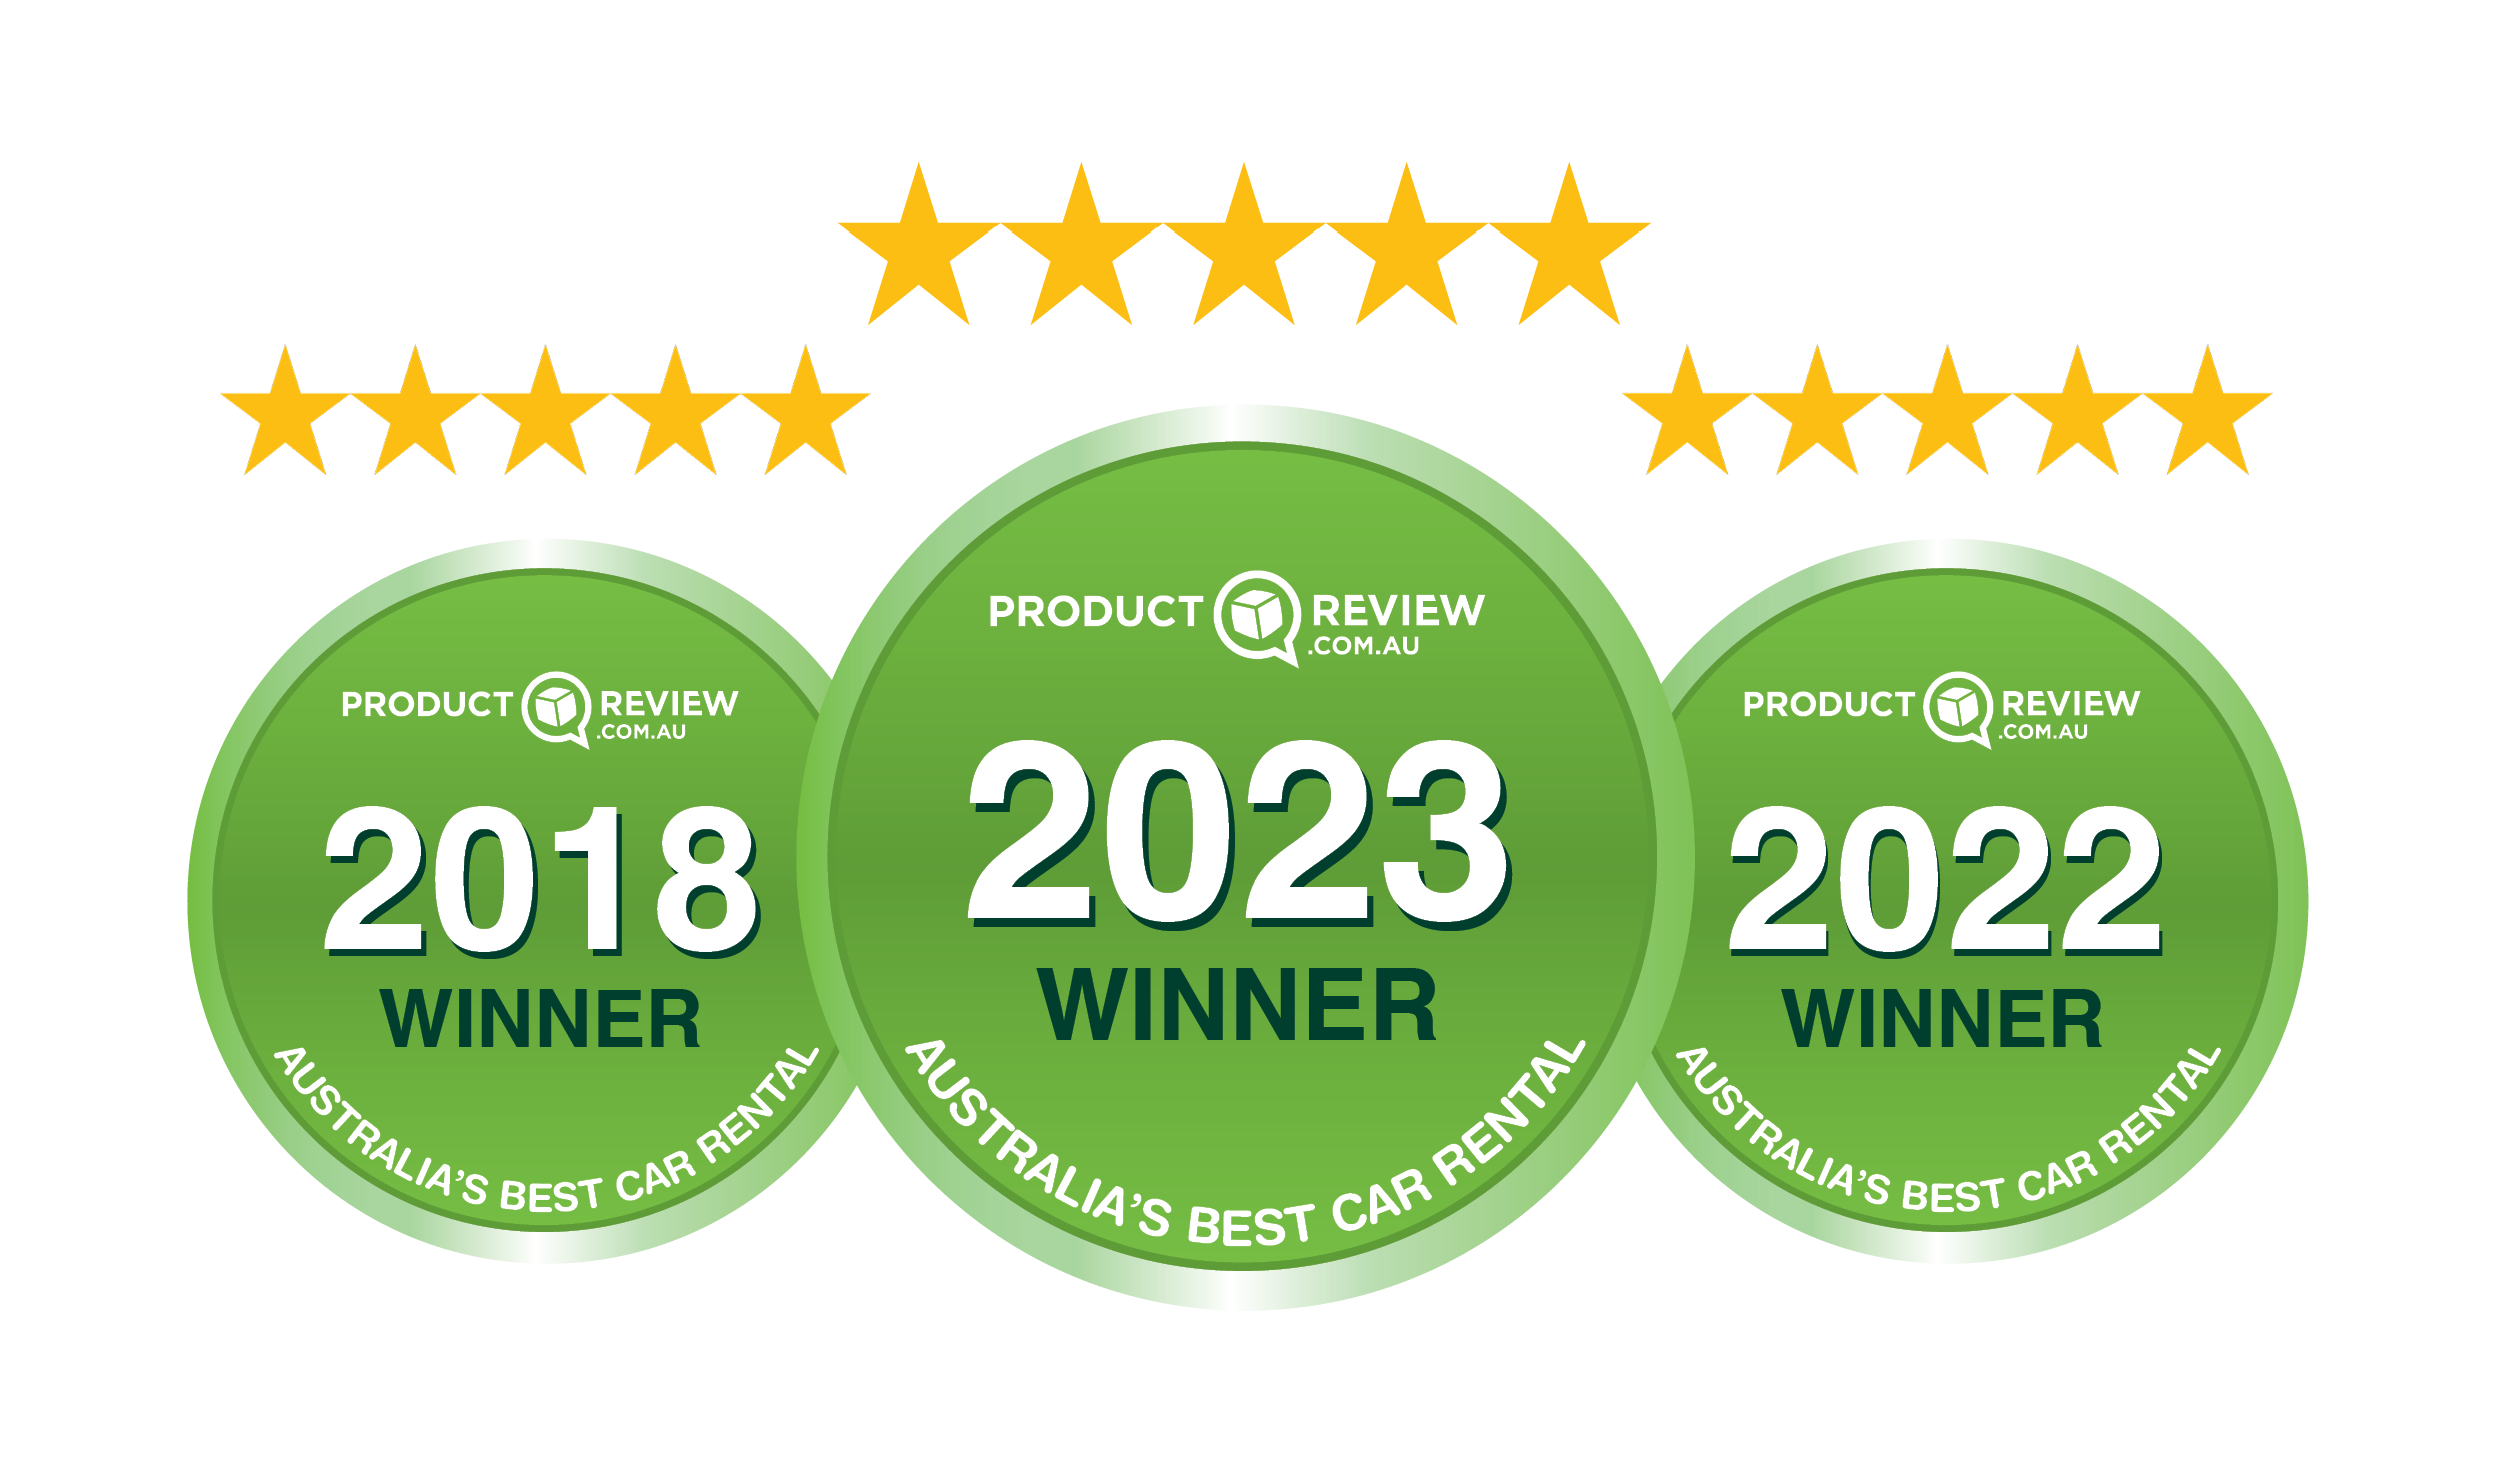 Product Review Awards badges